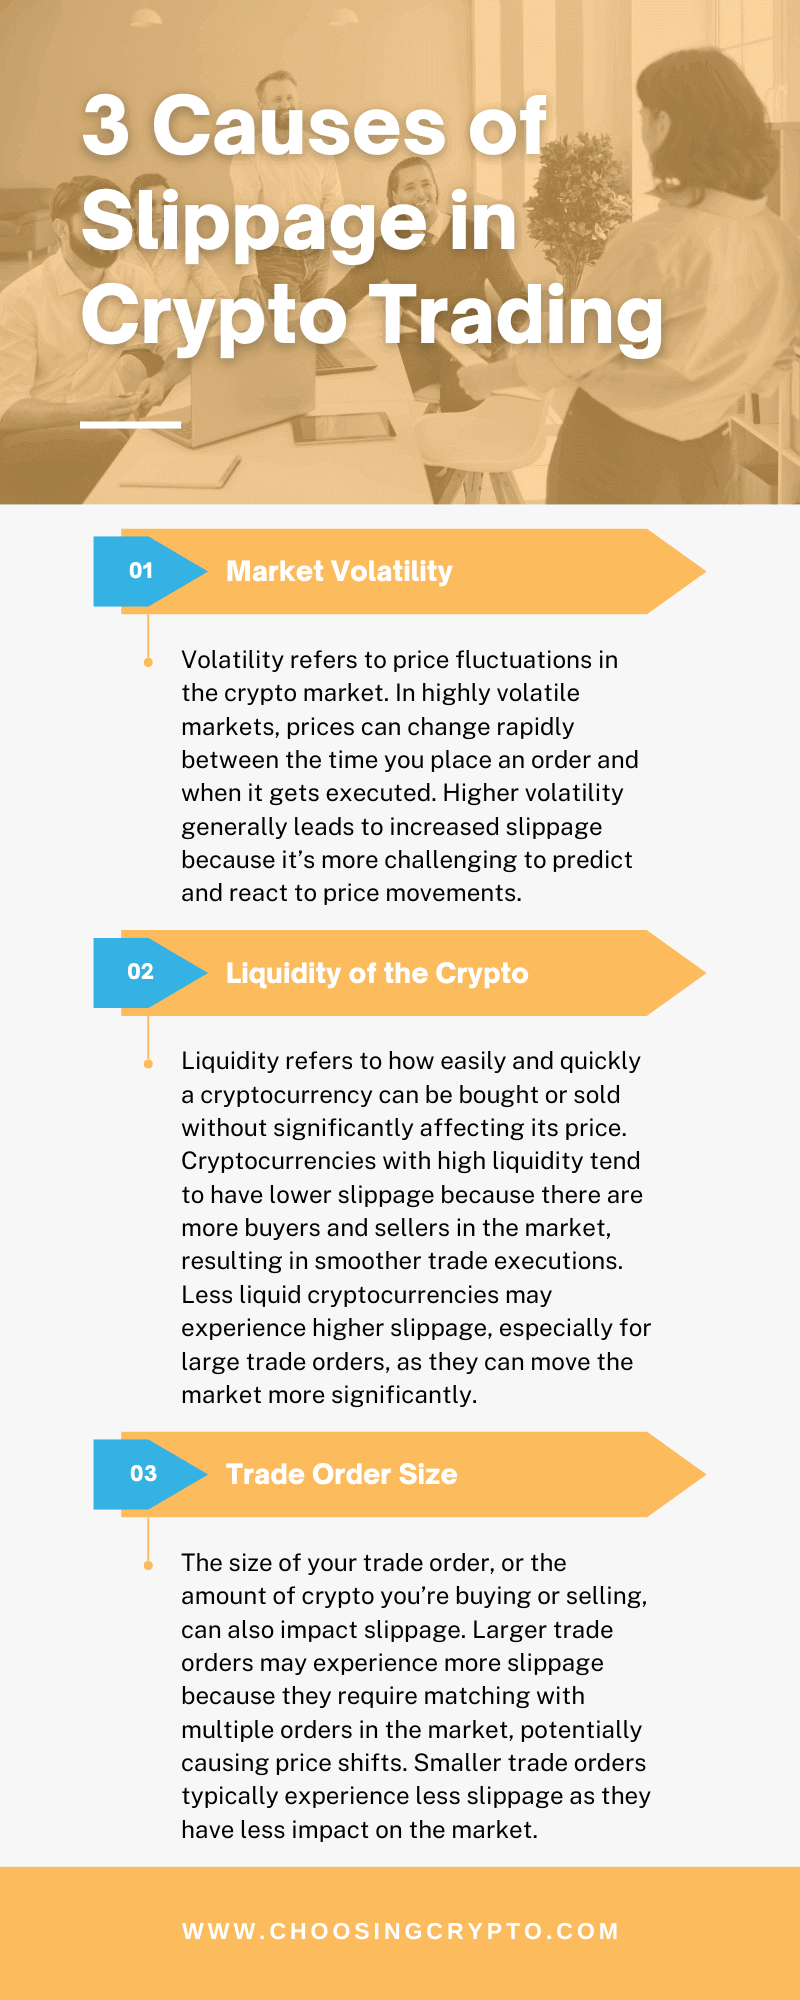 Causes of Slippage in Crypto Trading